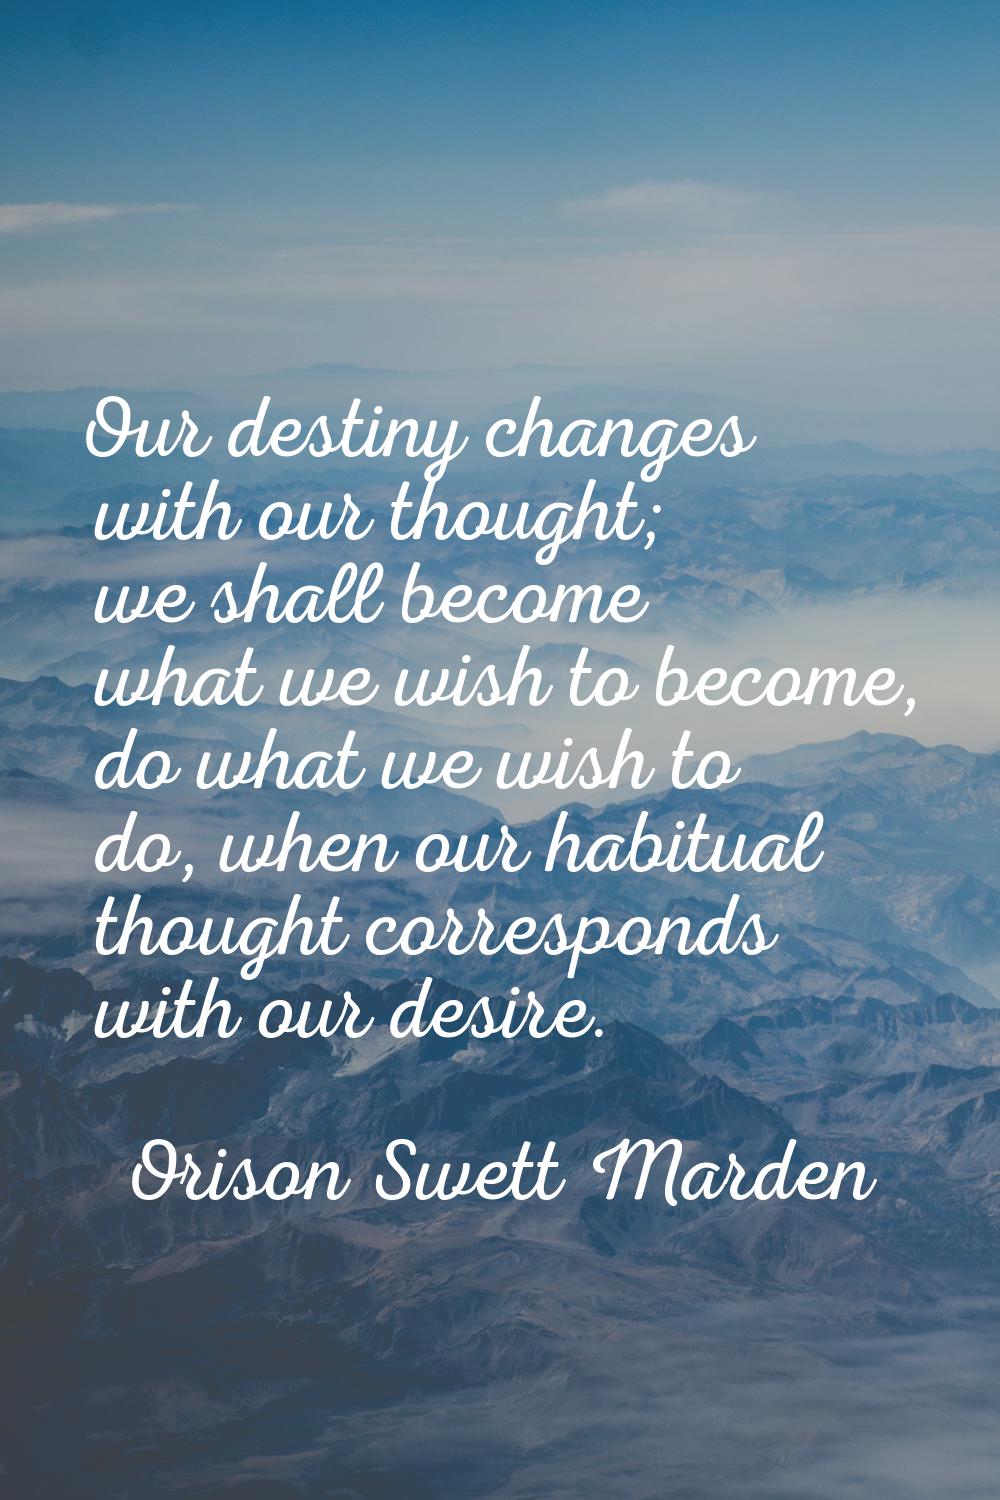 Our destiny changes with our thought; we shall become what we wish to become, do what we wish to do